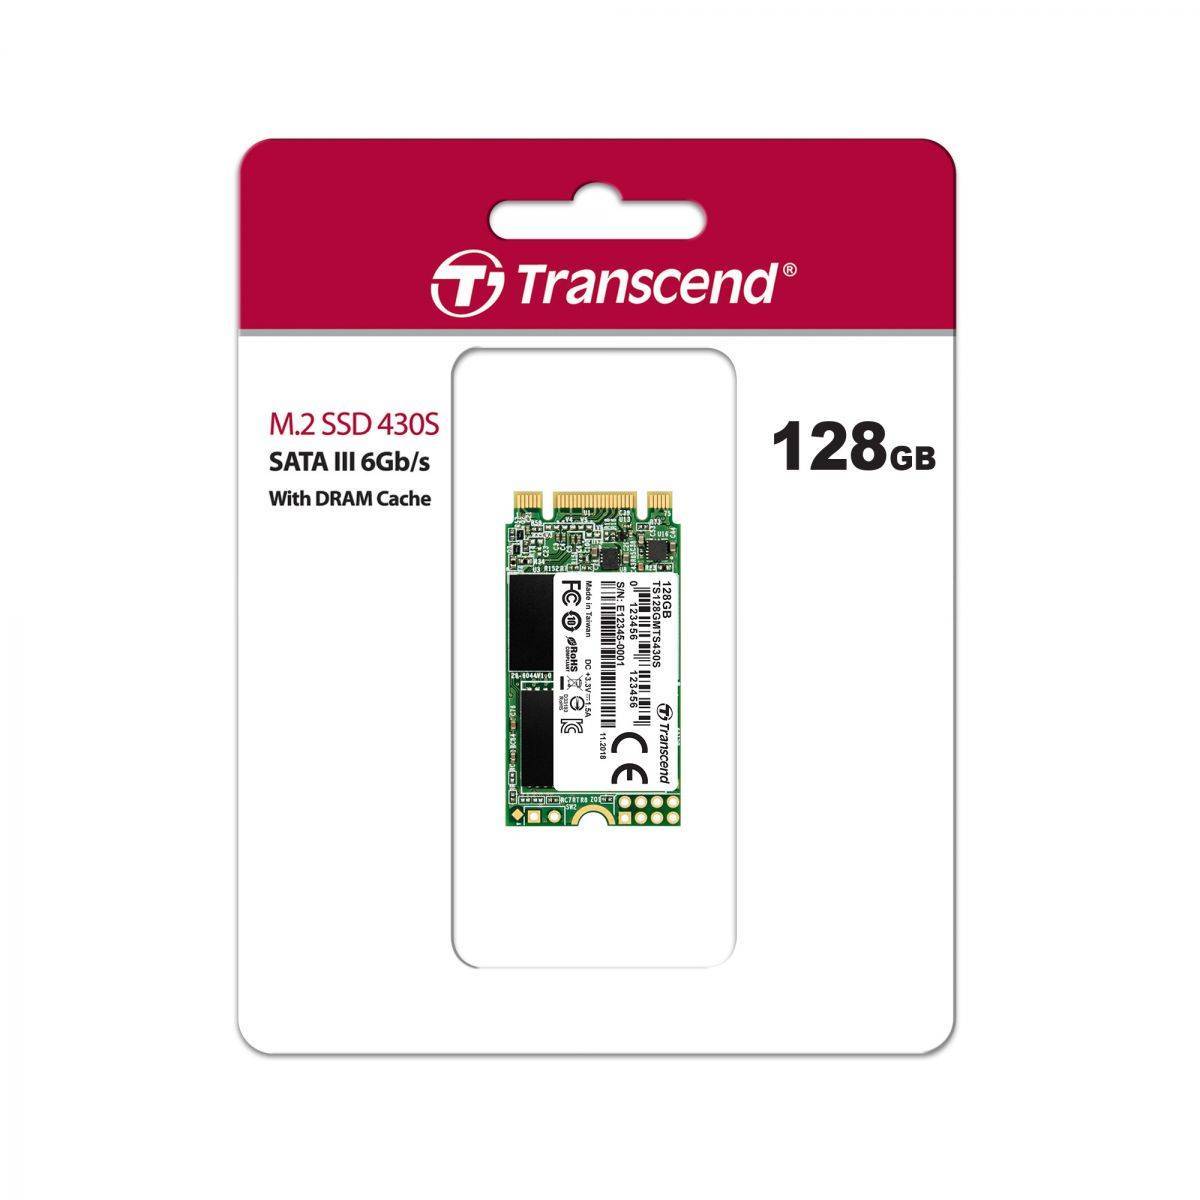 Transcend 128GB M.2 SSD MTS 430 series (22x42mm) with DRAM cache R/W 560/500 MB/s